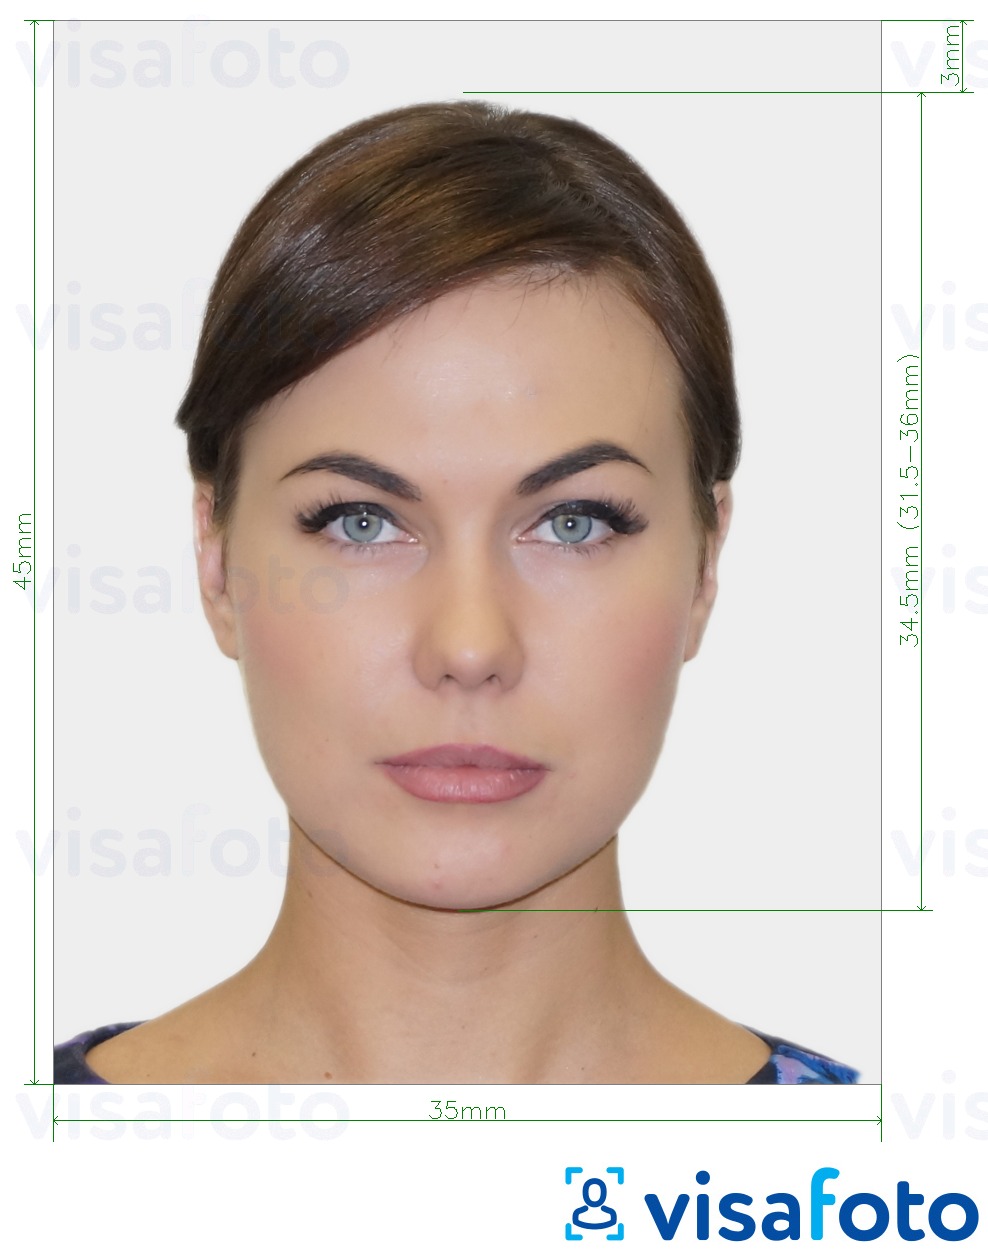 Example of photo for Hungary passport 35x45mm (3.5x4.5 cm) with exact size specification